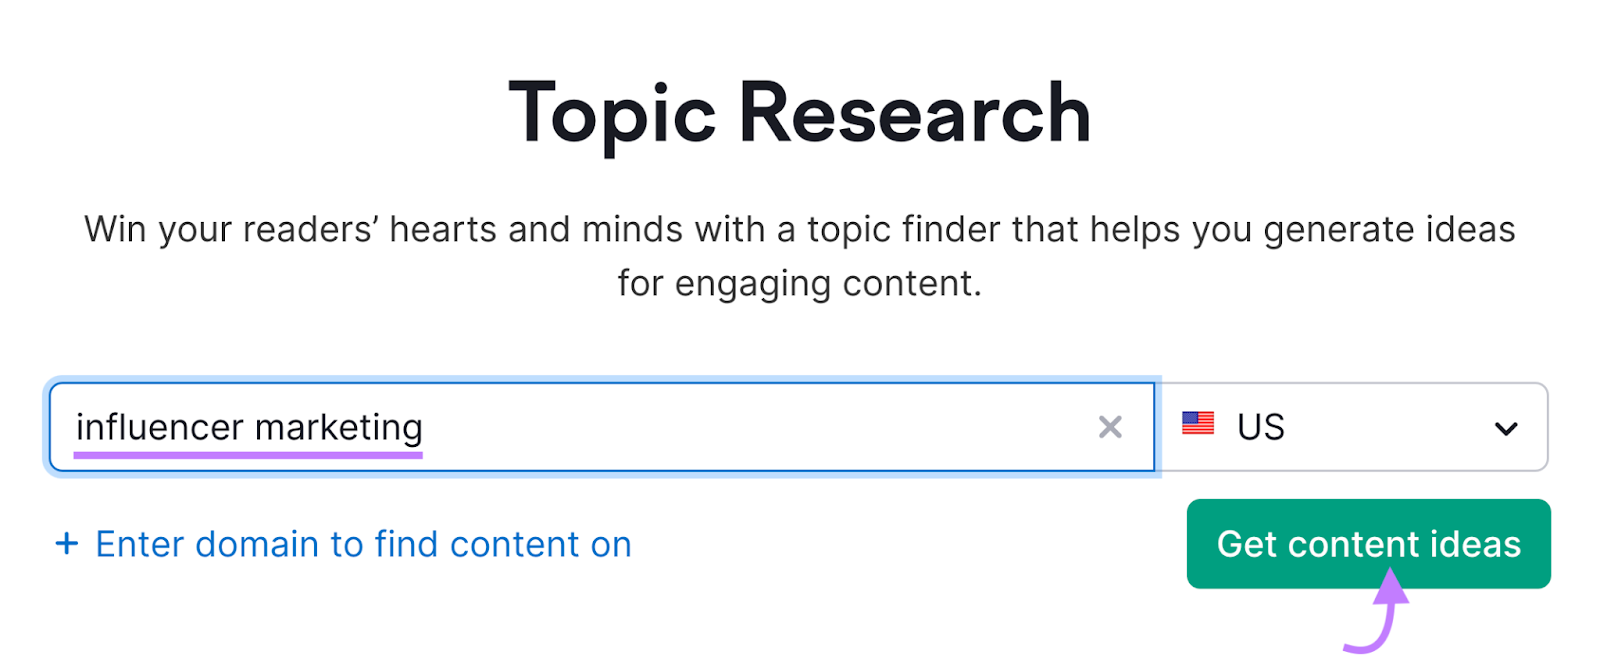 Searching for "influencer marketing" in Topic Research tool